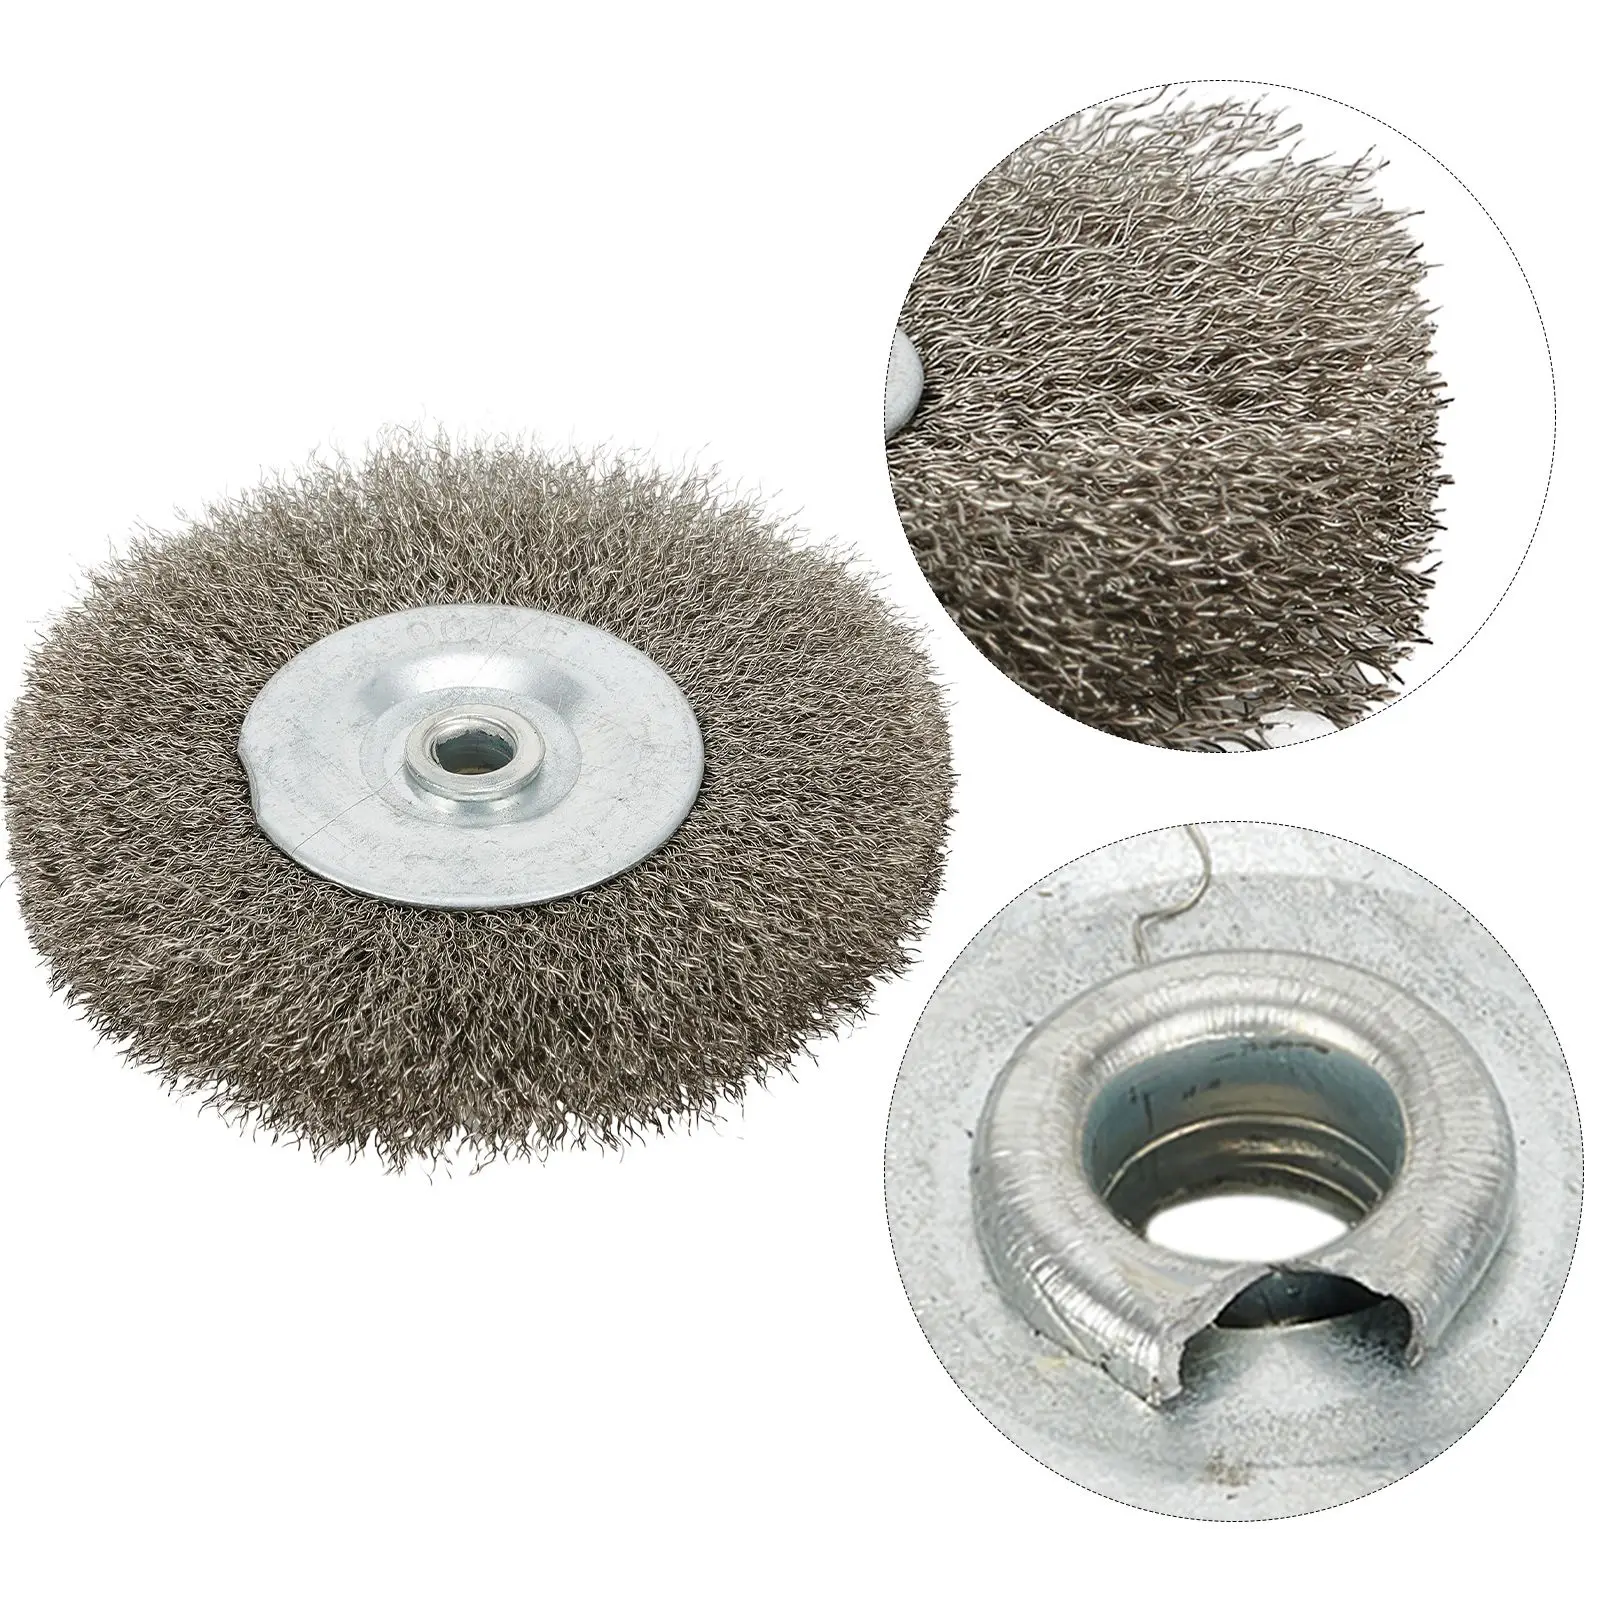 Flat Crimped Wire Wheel Brush For Angle Grinder 0.52in Bore Stainless Steel 3inch Outer Diamter 13mm Internal Diamter Power Tool